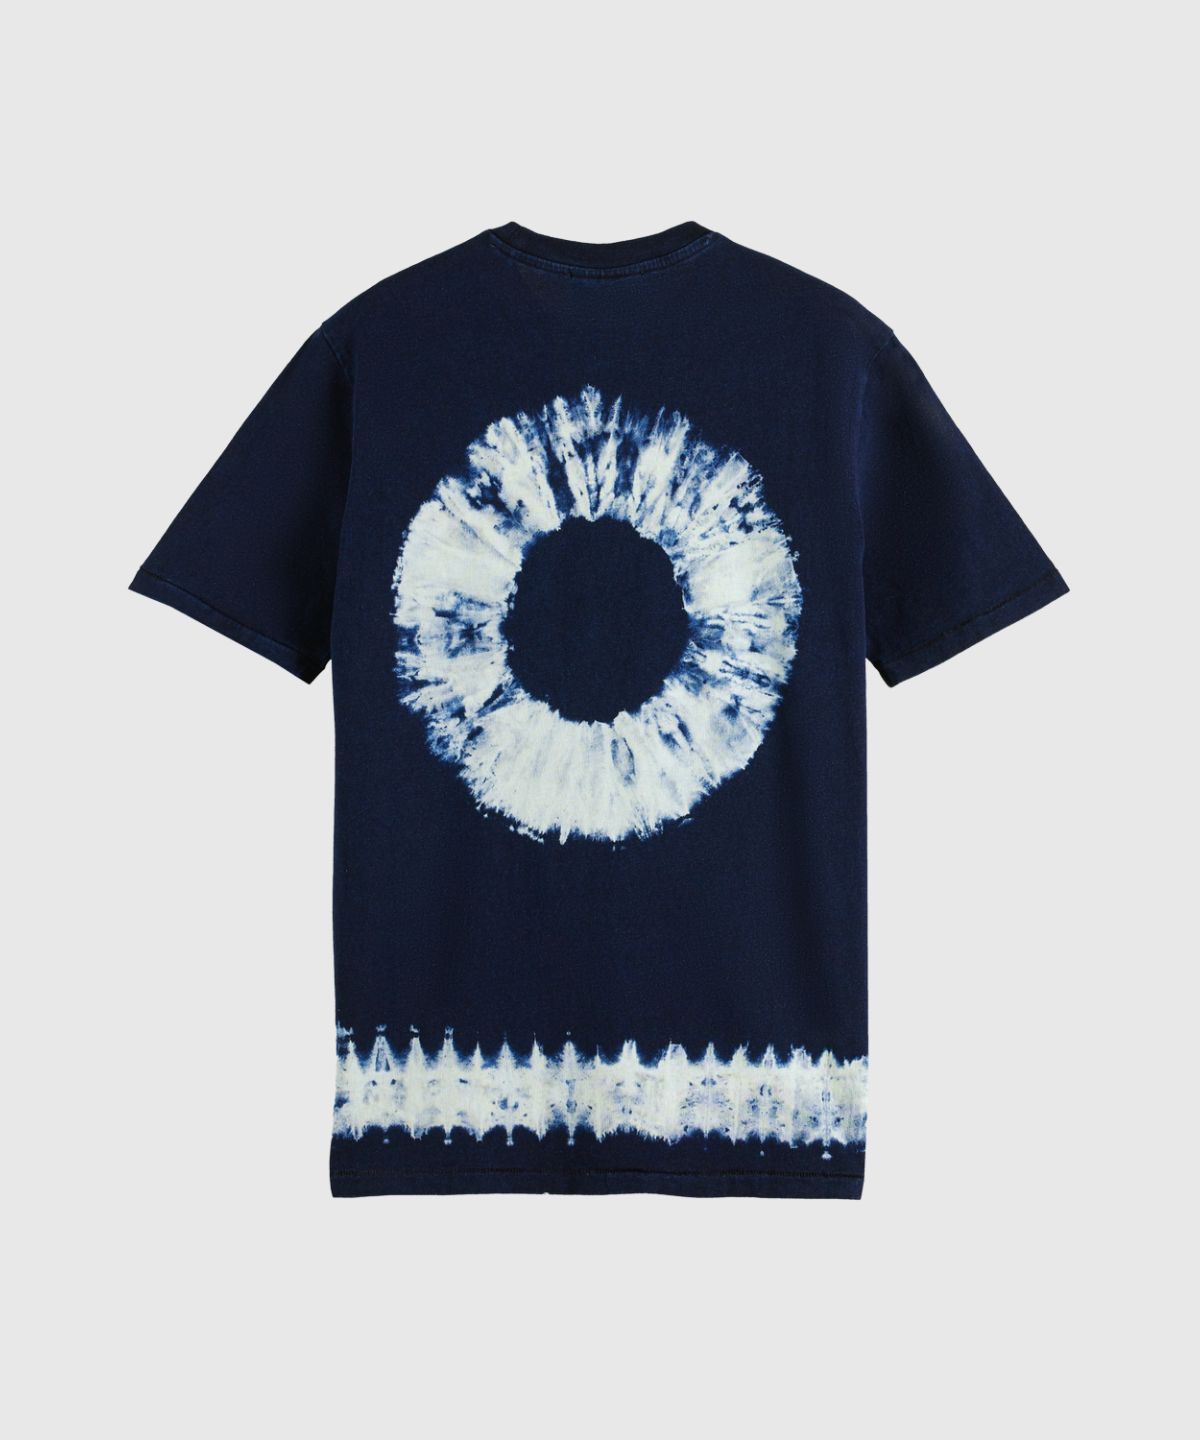 Indigo tee with placement tie-dye